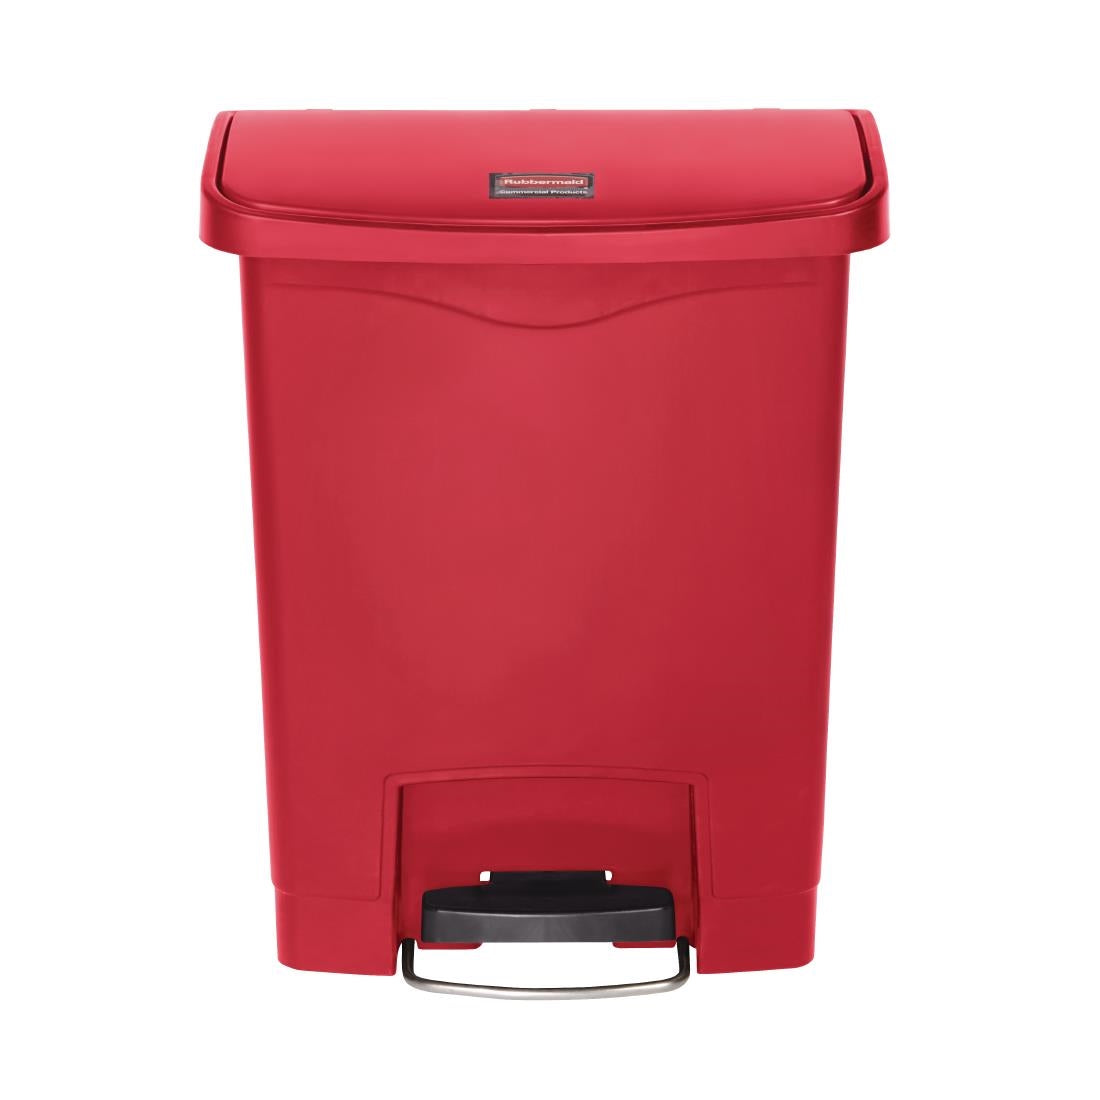 GL020 Rubbermaid Slim Jim Step on Front Pedal Red 30Ltr